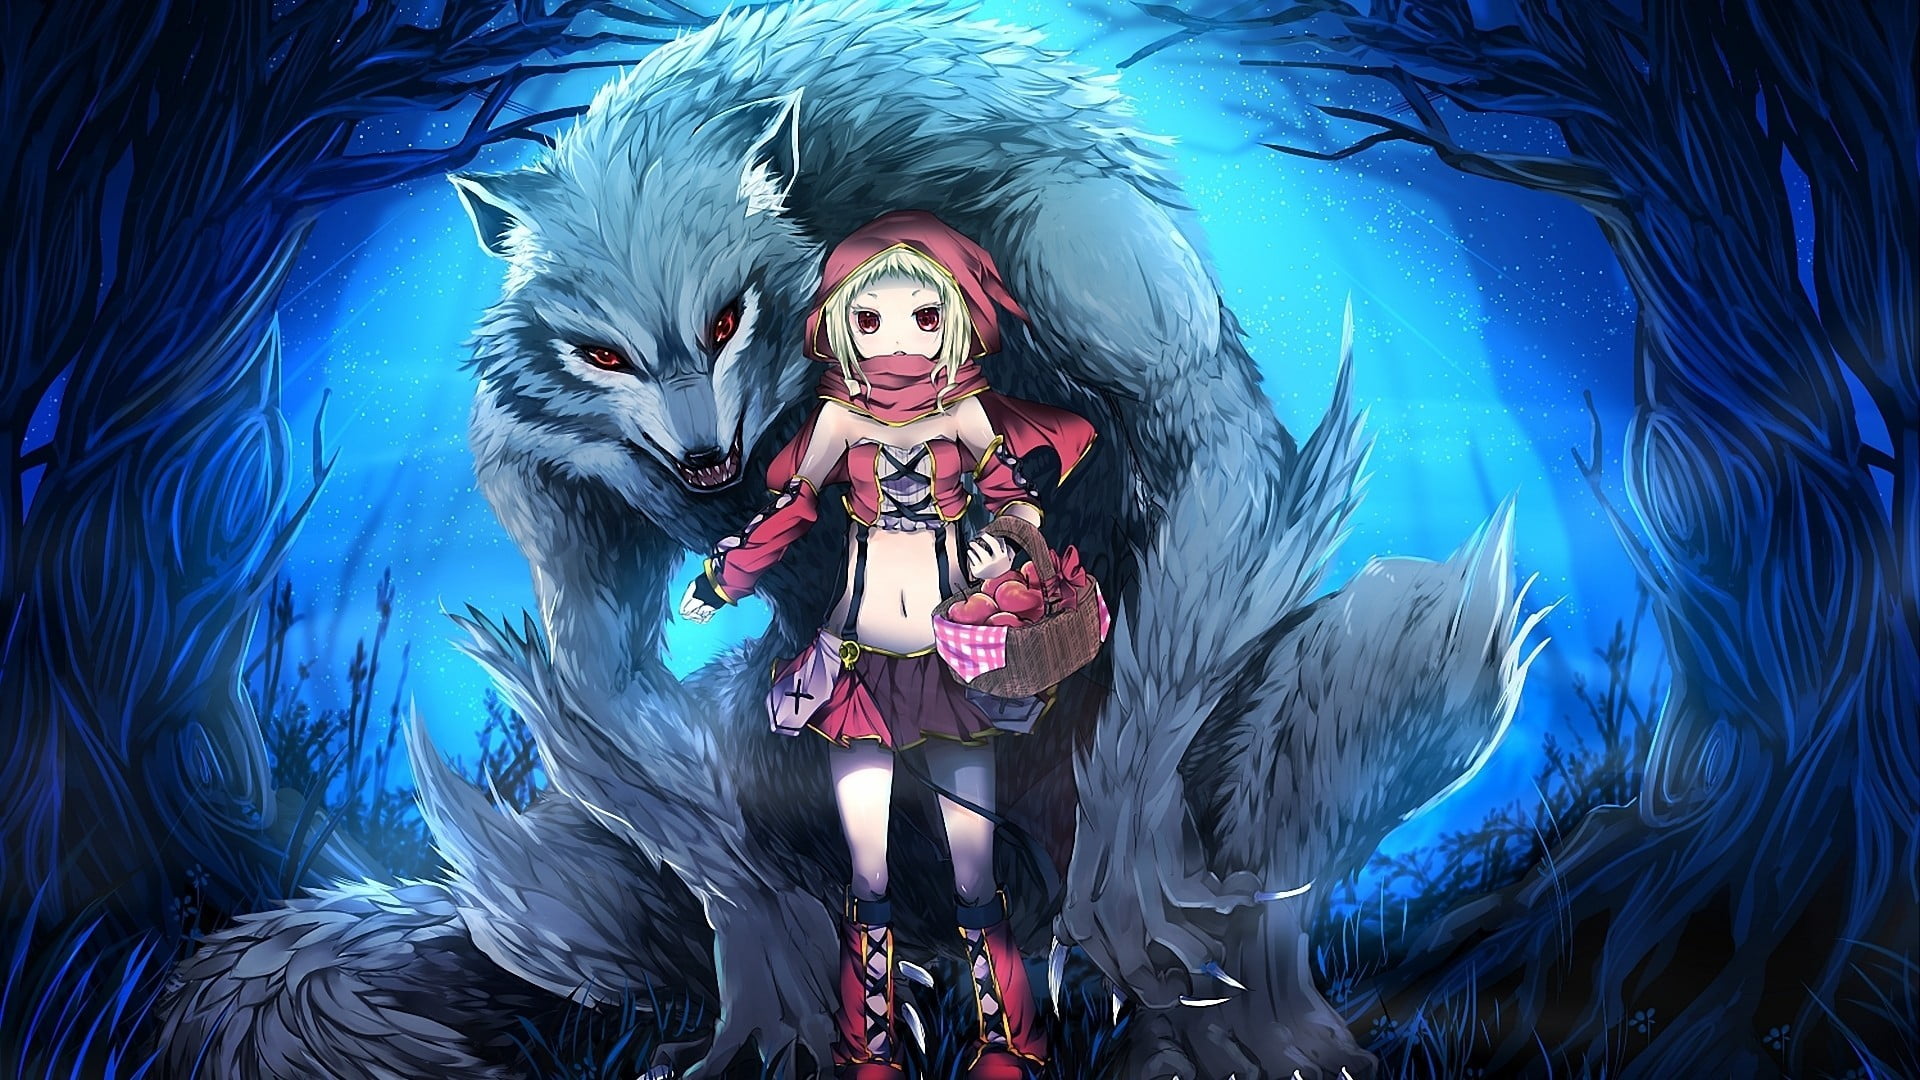 Anime Version Of Little Red Riding Hood And Gray Wolf Hd Wallpaper Images, Photos, Reviews